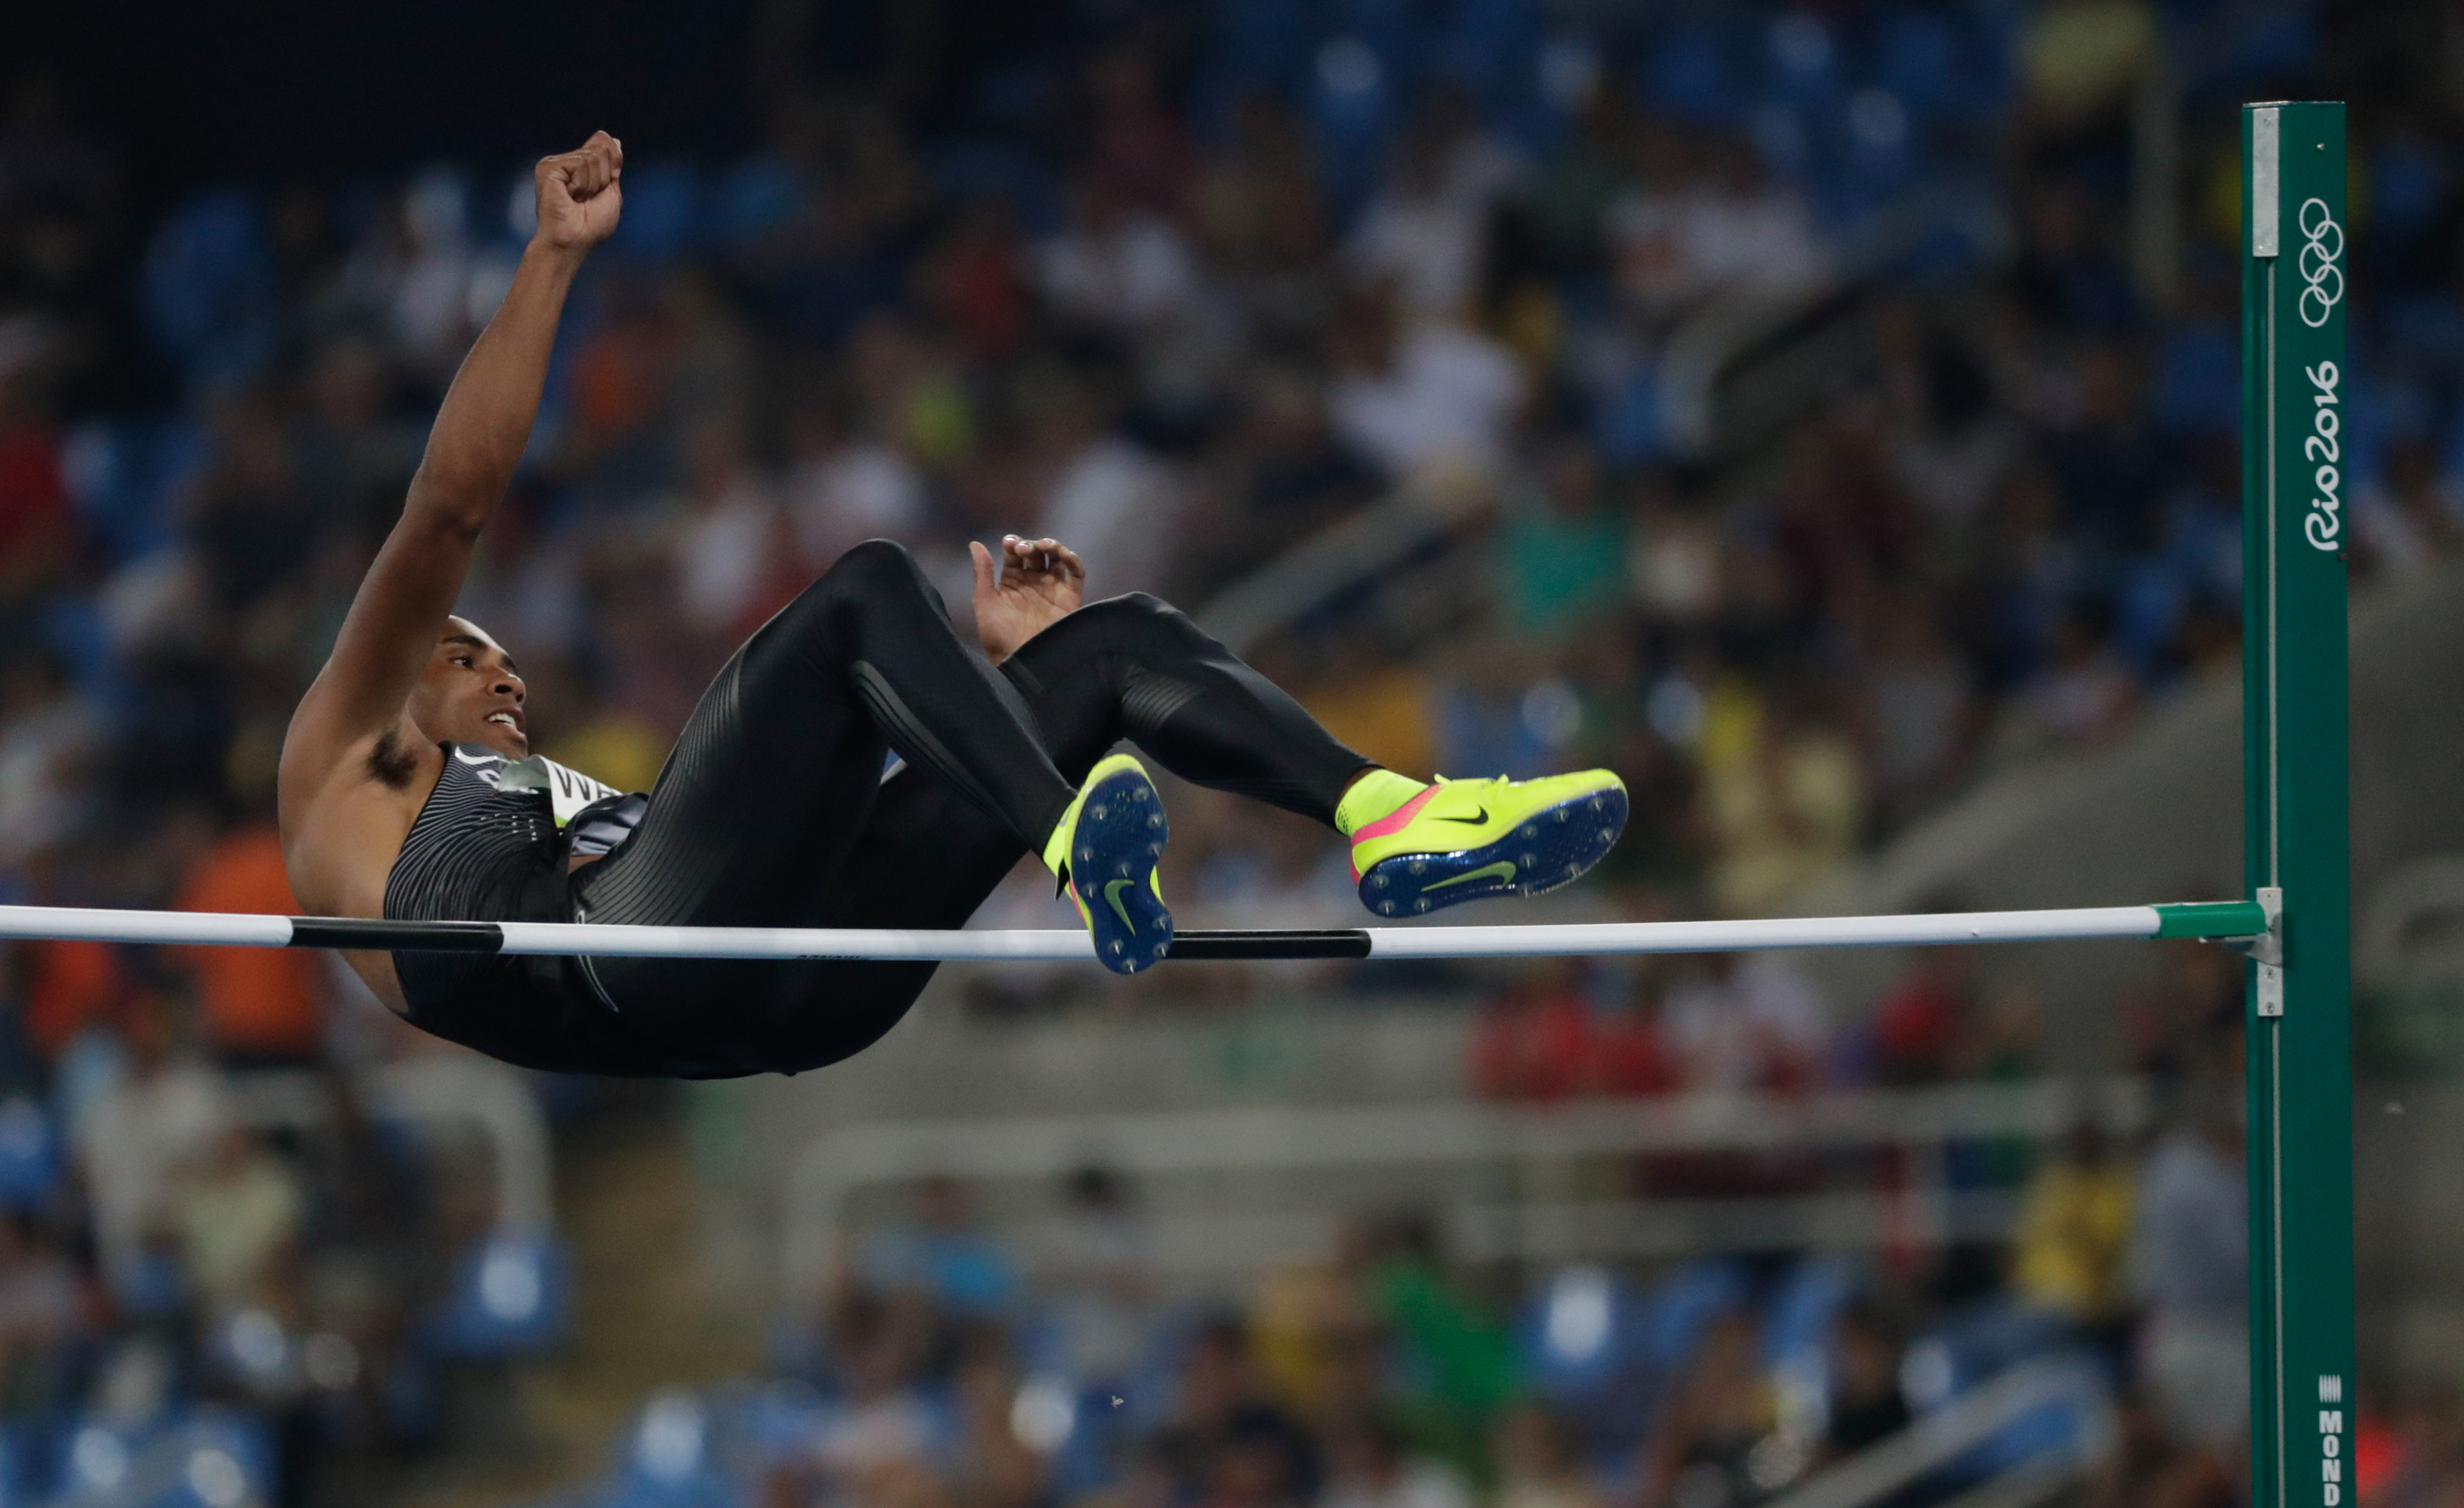 Damian Warner competes in the high jump of the decathlon at Rio 2016 (COC/Jason Ransom)